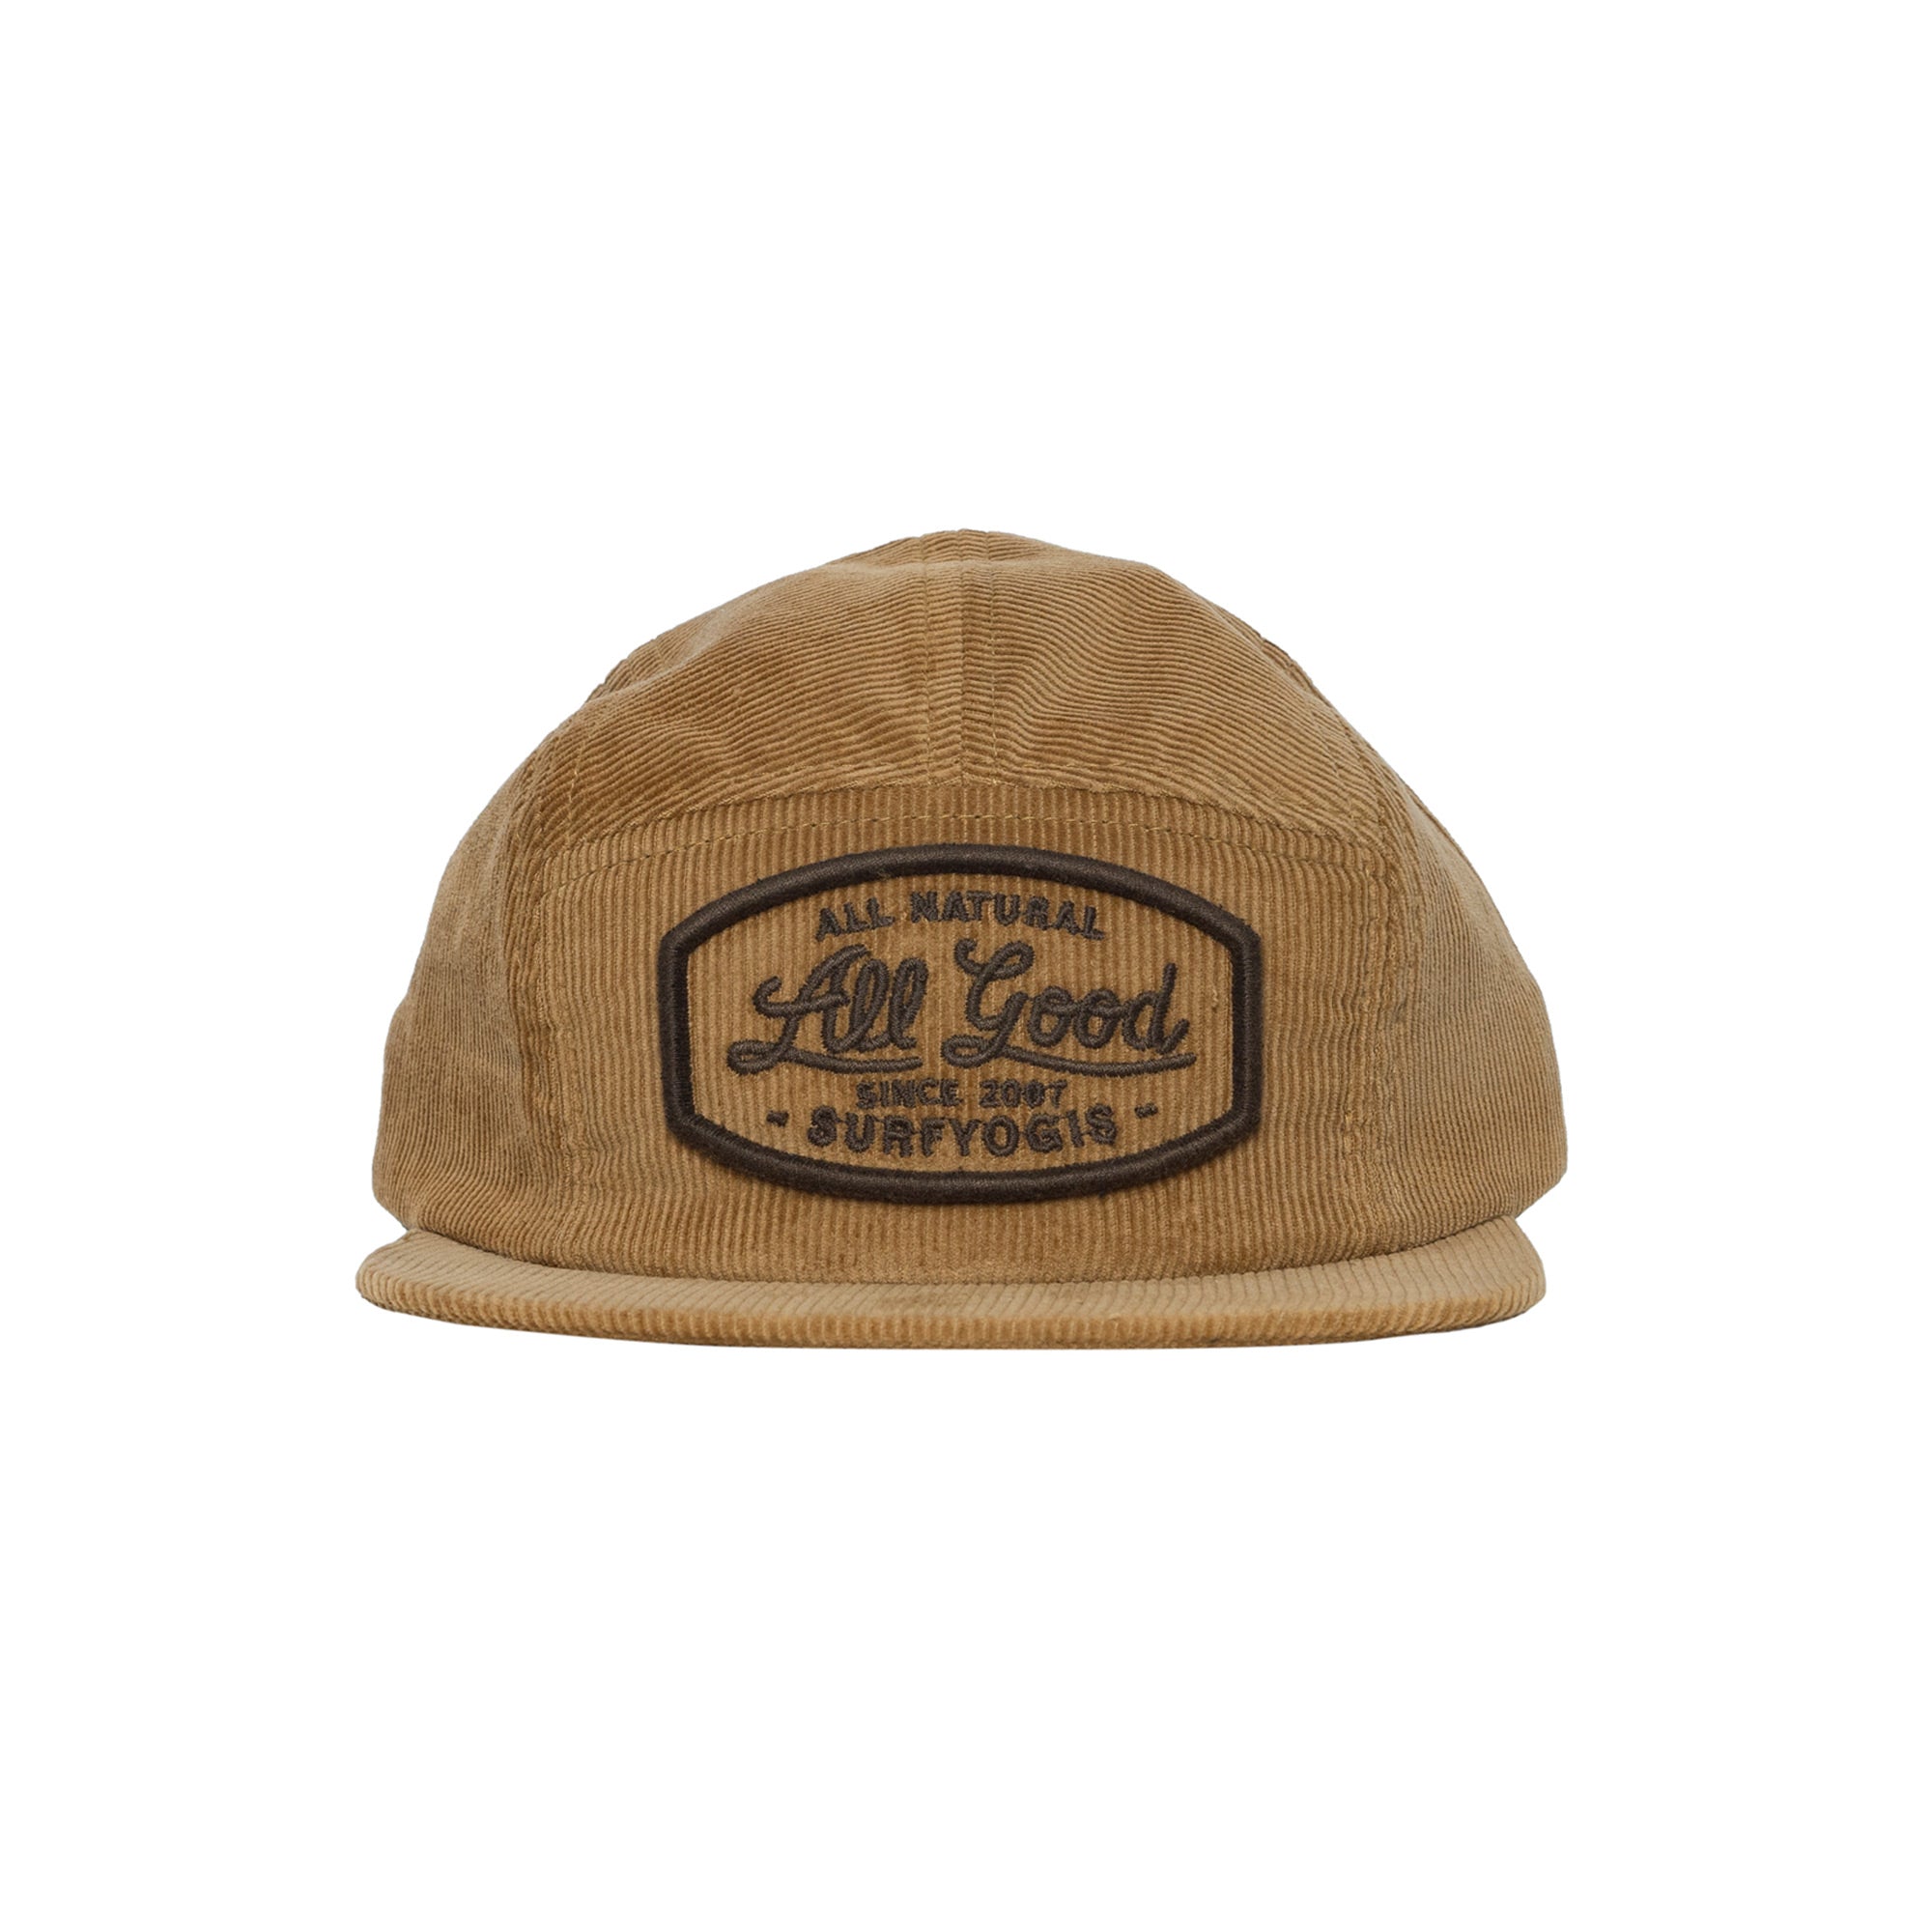 Brown Corduroy Hat. Brown Embroidered Text. "All Natural, ALL GOOD, Since 2007, Surfyogis